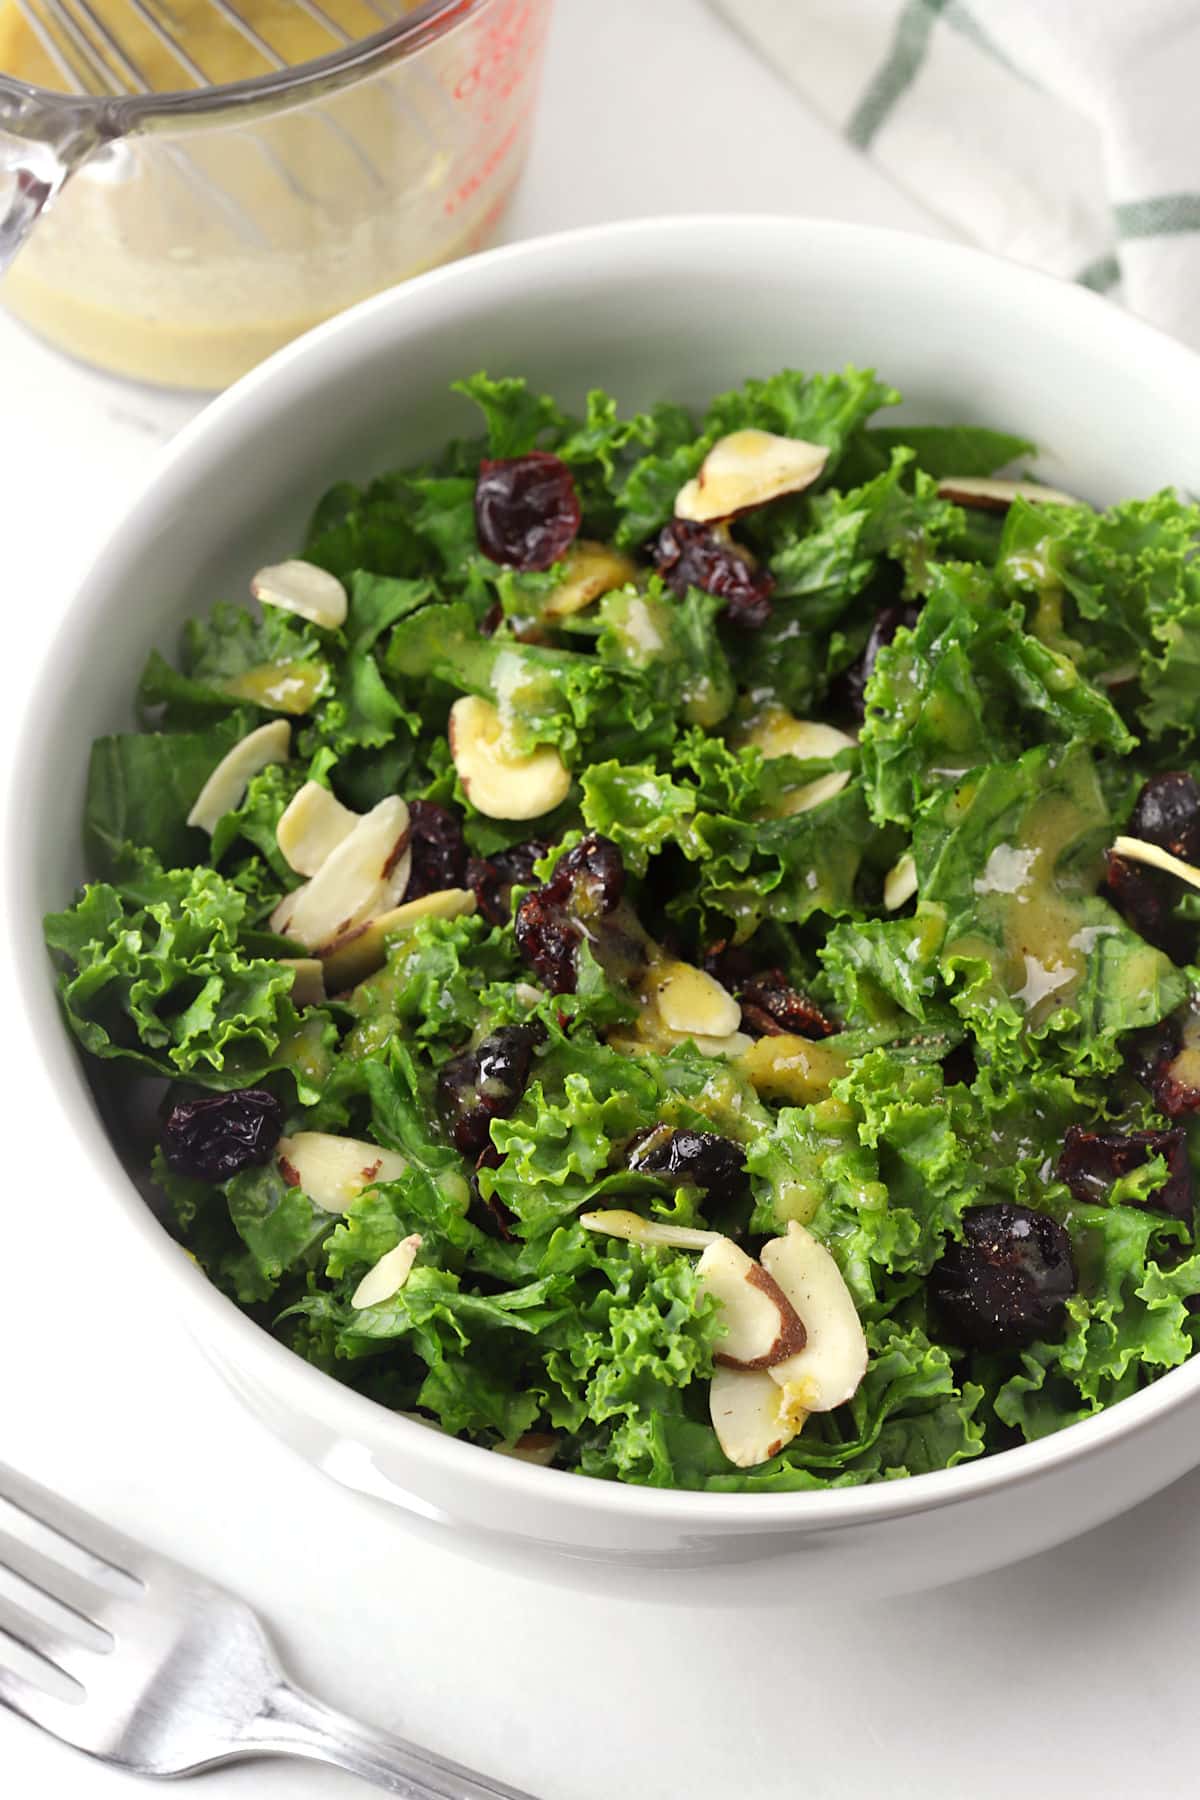 Prepared kale cranberry salad in a white serving bowl.